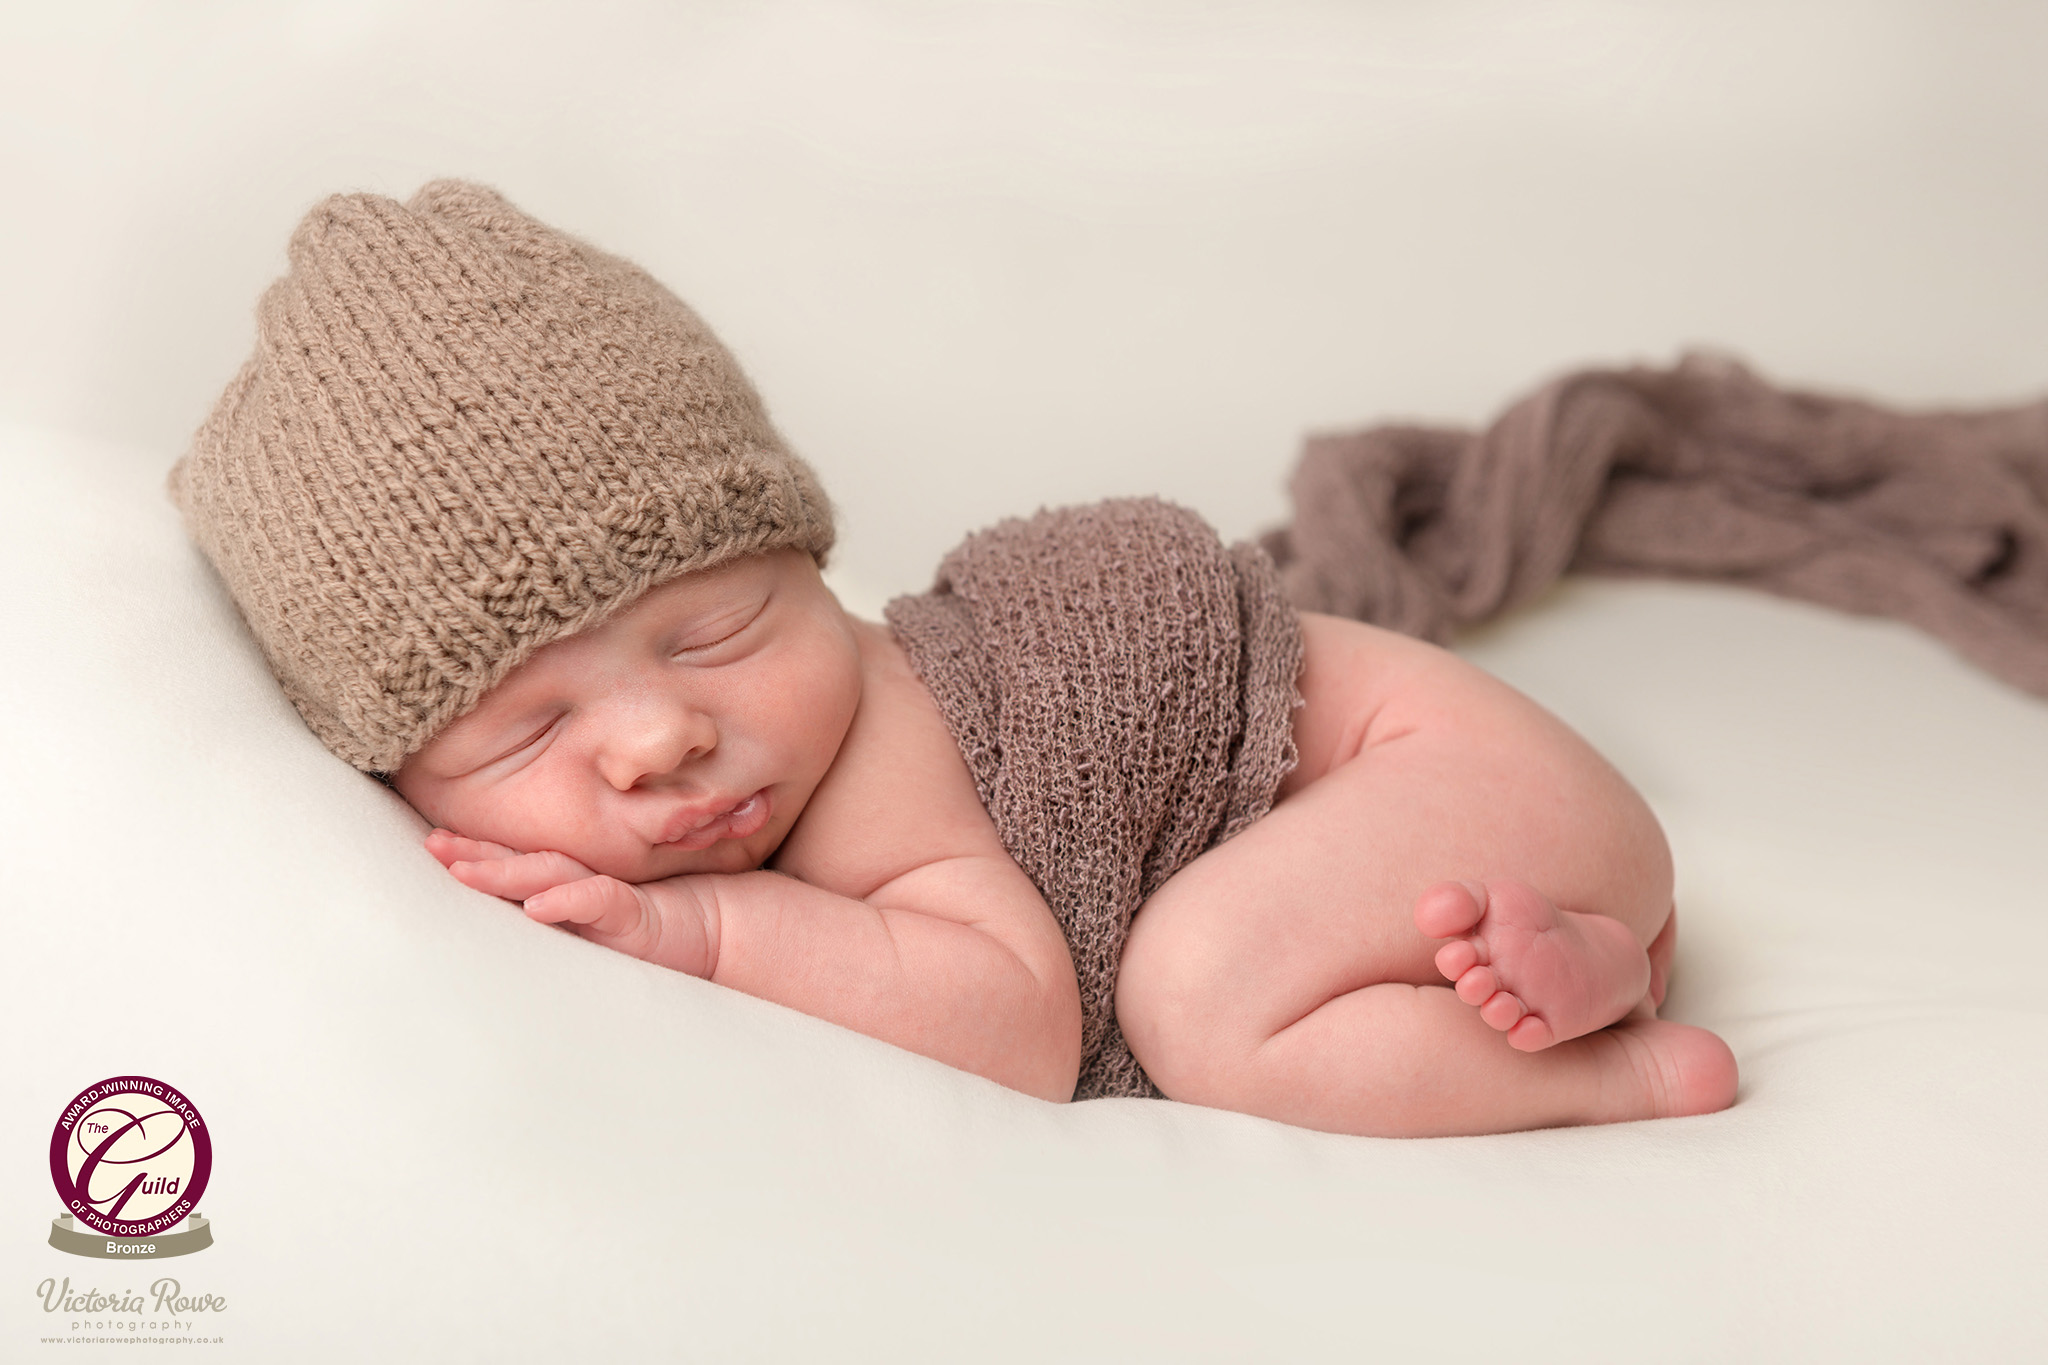 Bronze award winner in the Guild of Photographers' Image of the Month competition for newborn photography